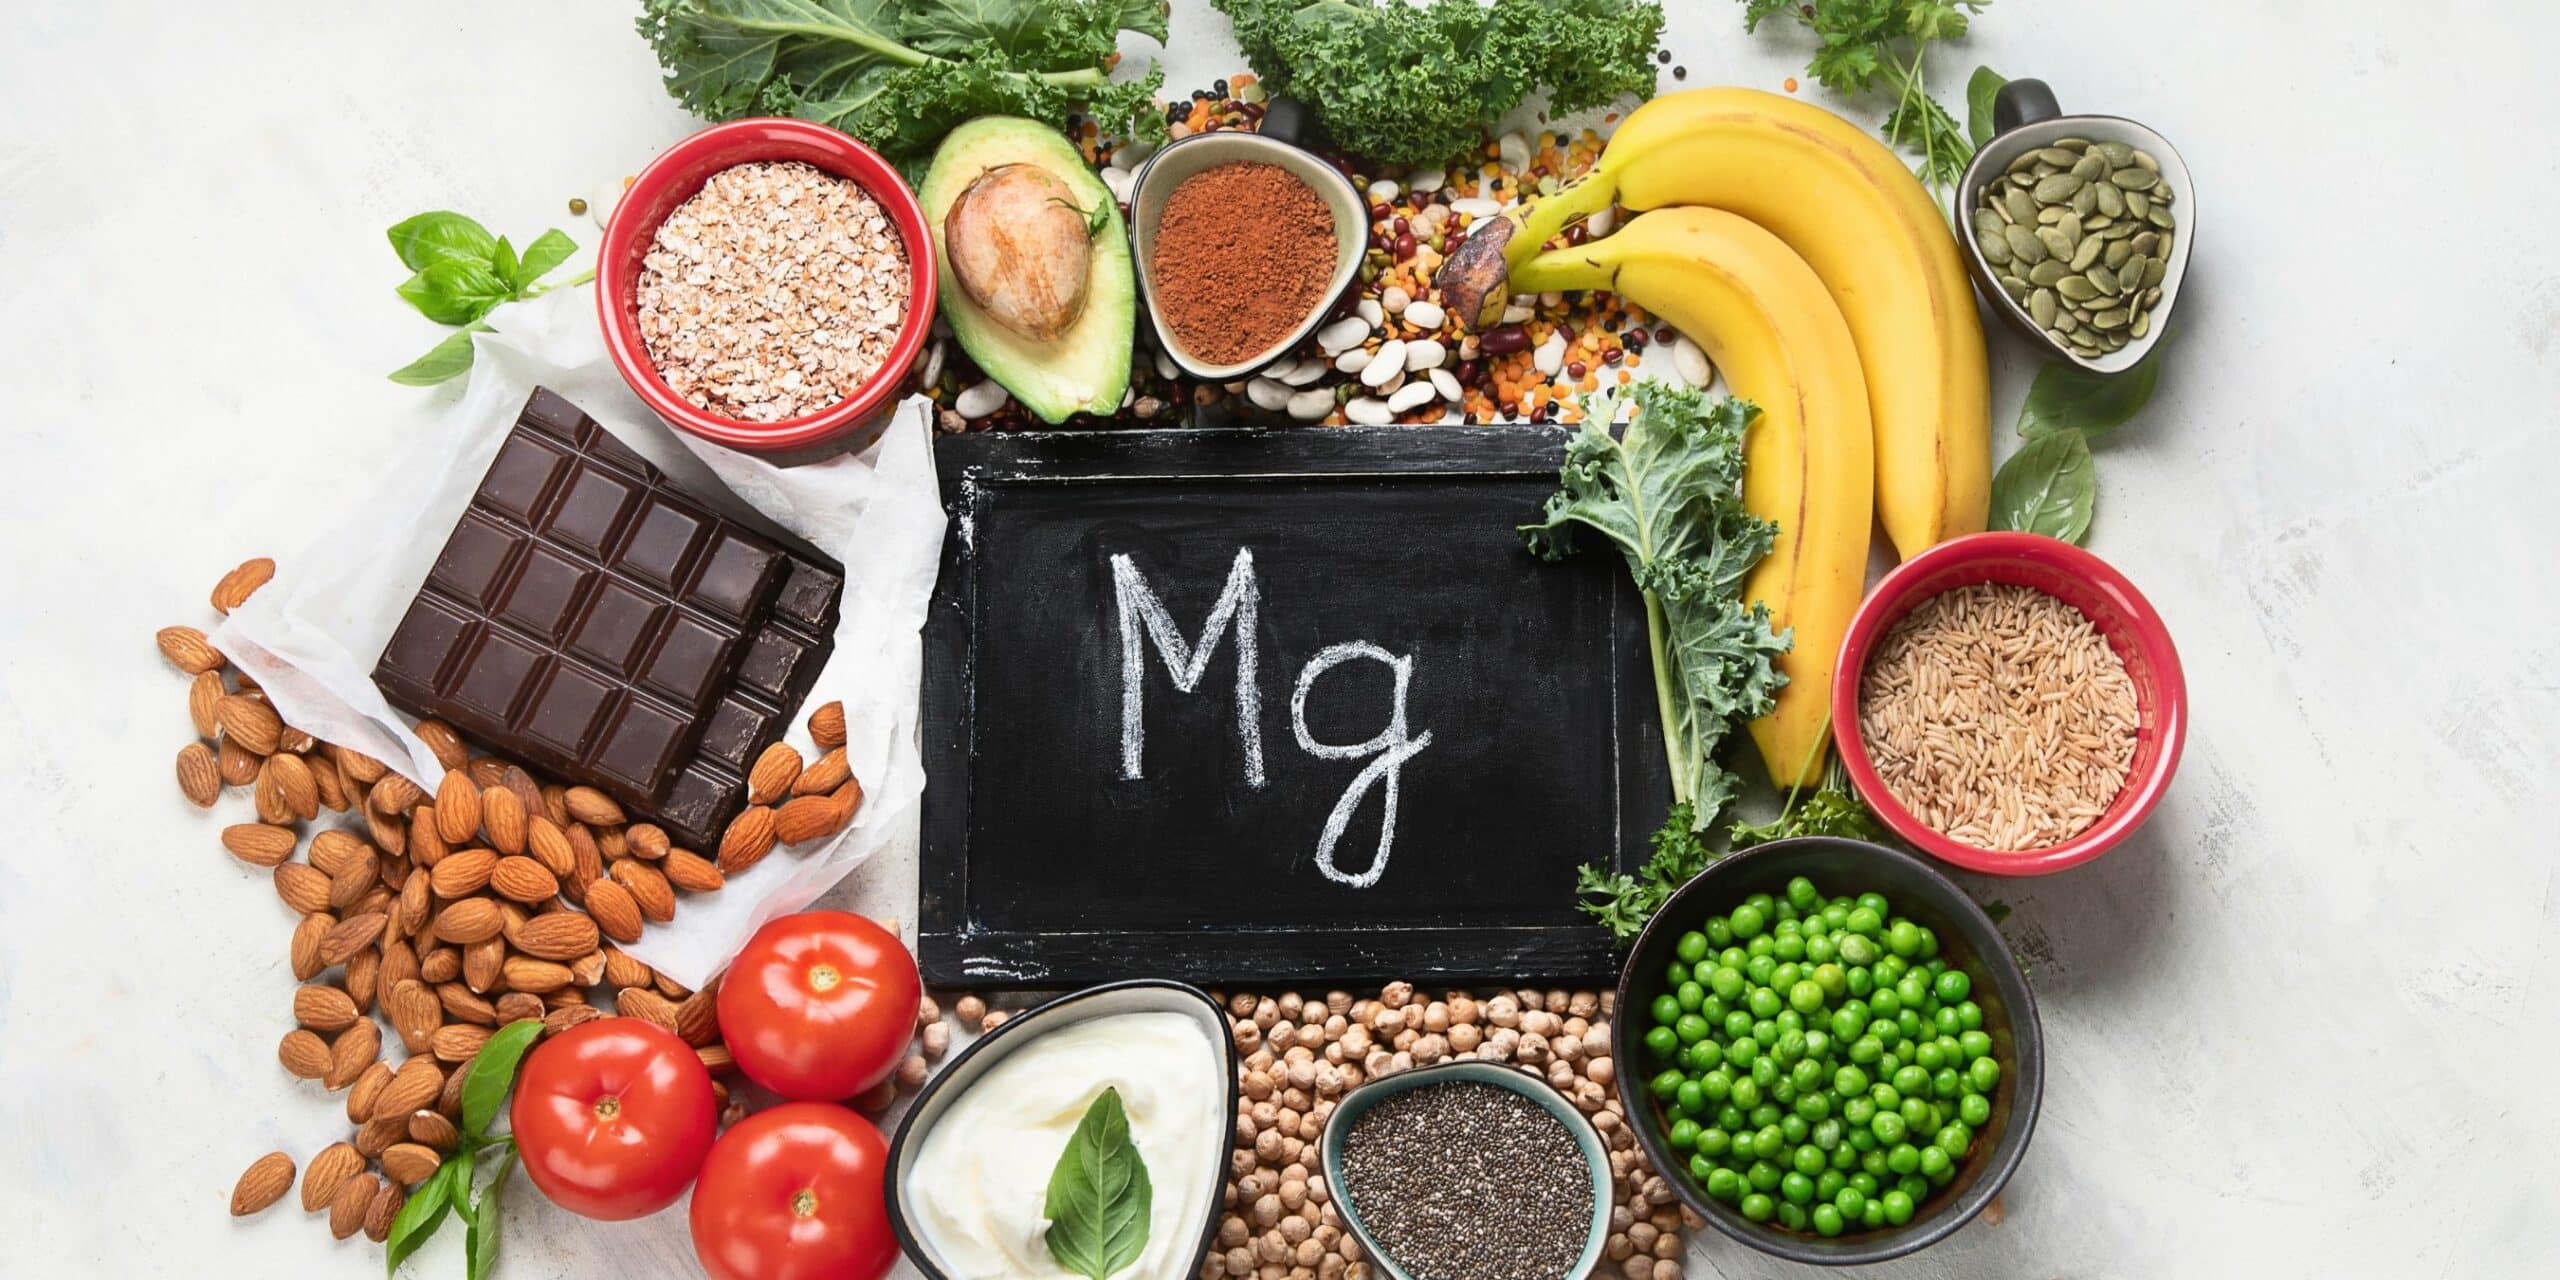 magnesium containing foods around a chalkboard with Mg